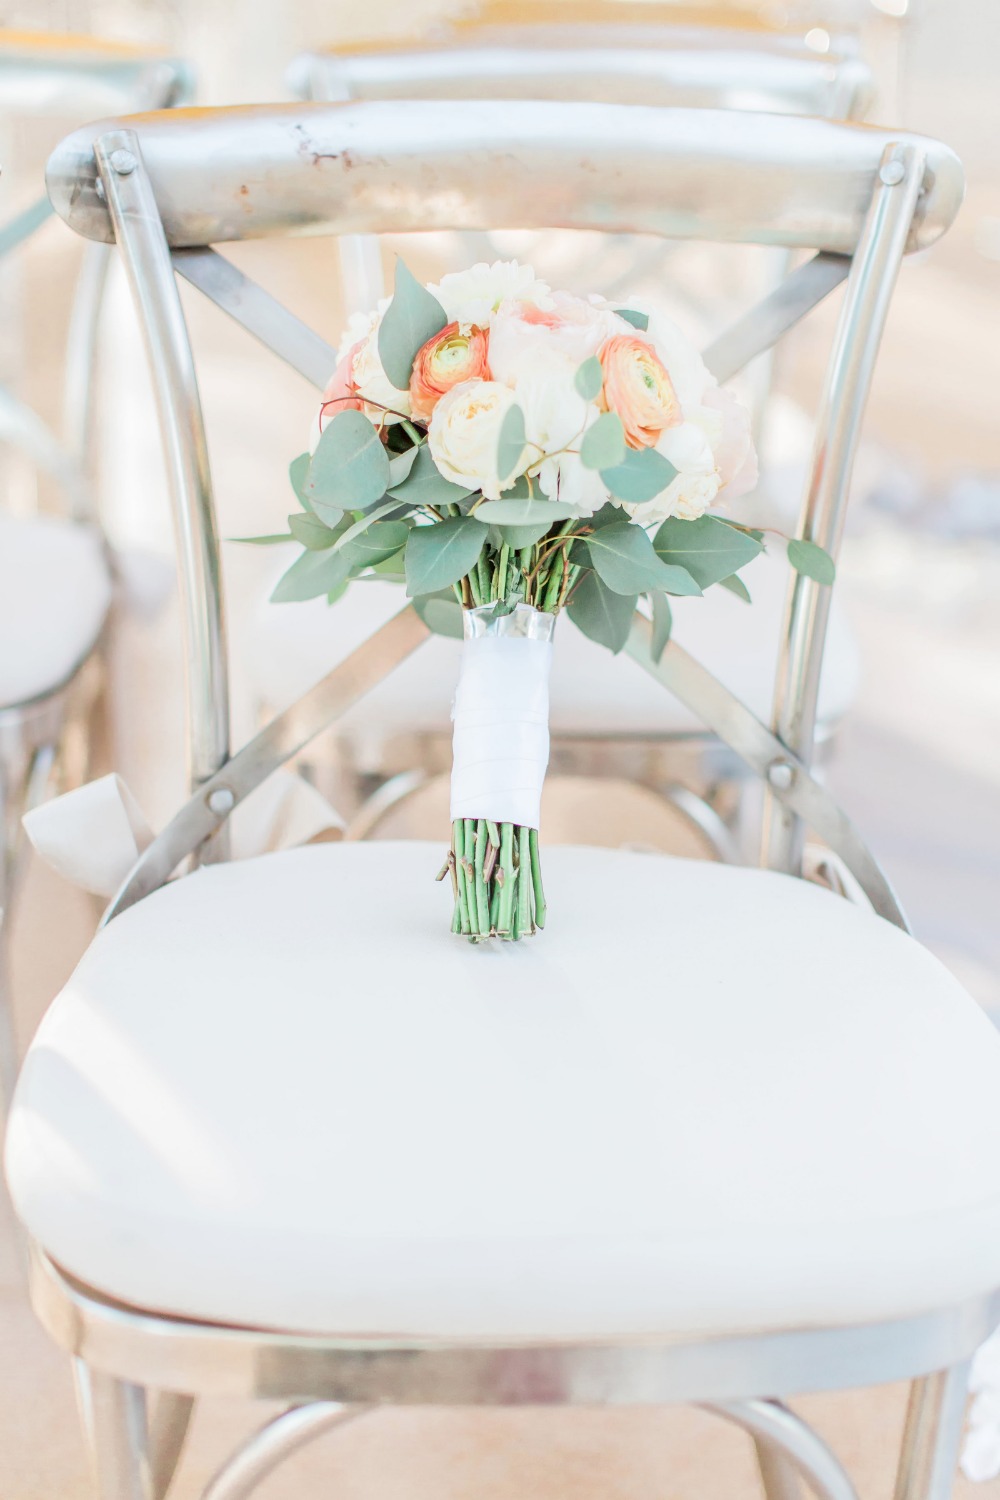 Silver chairs and bouquet